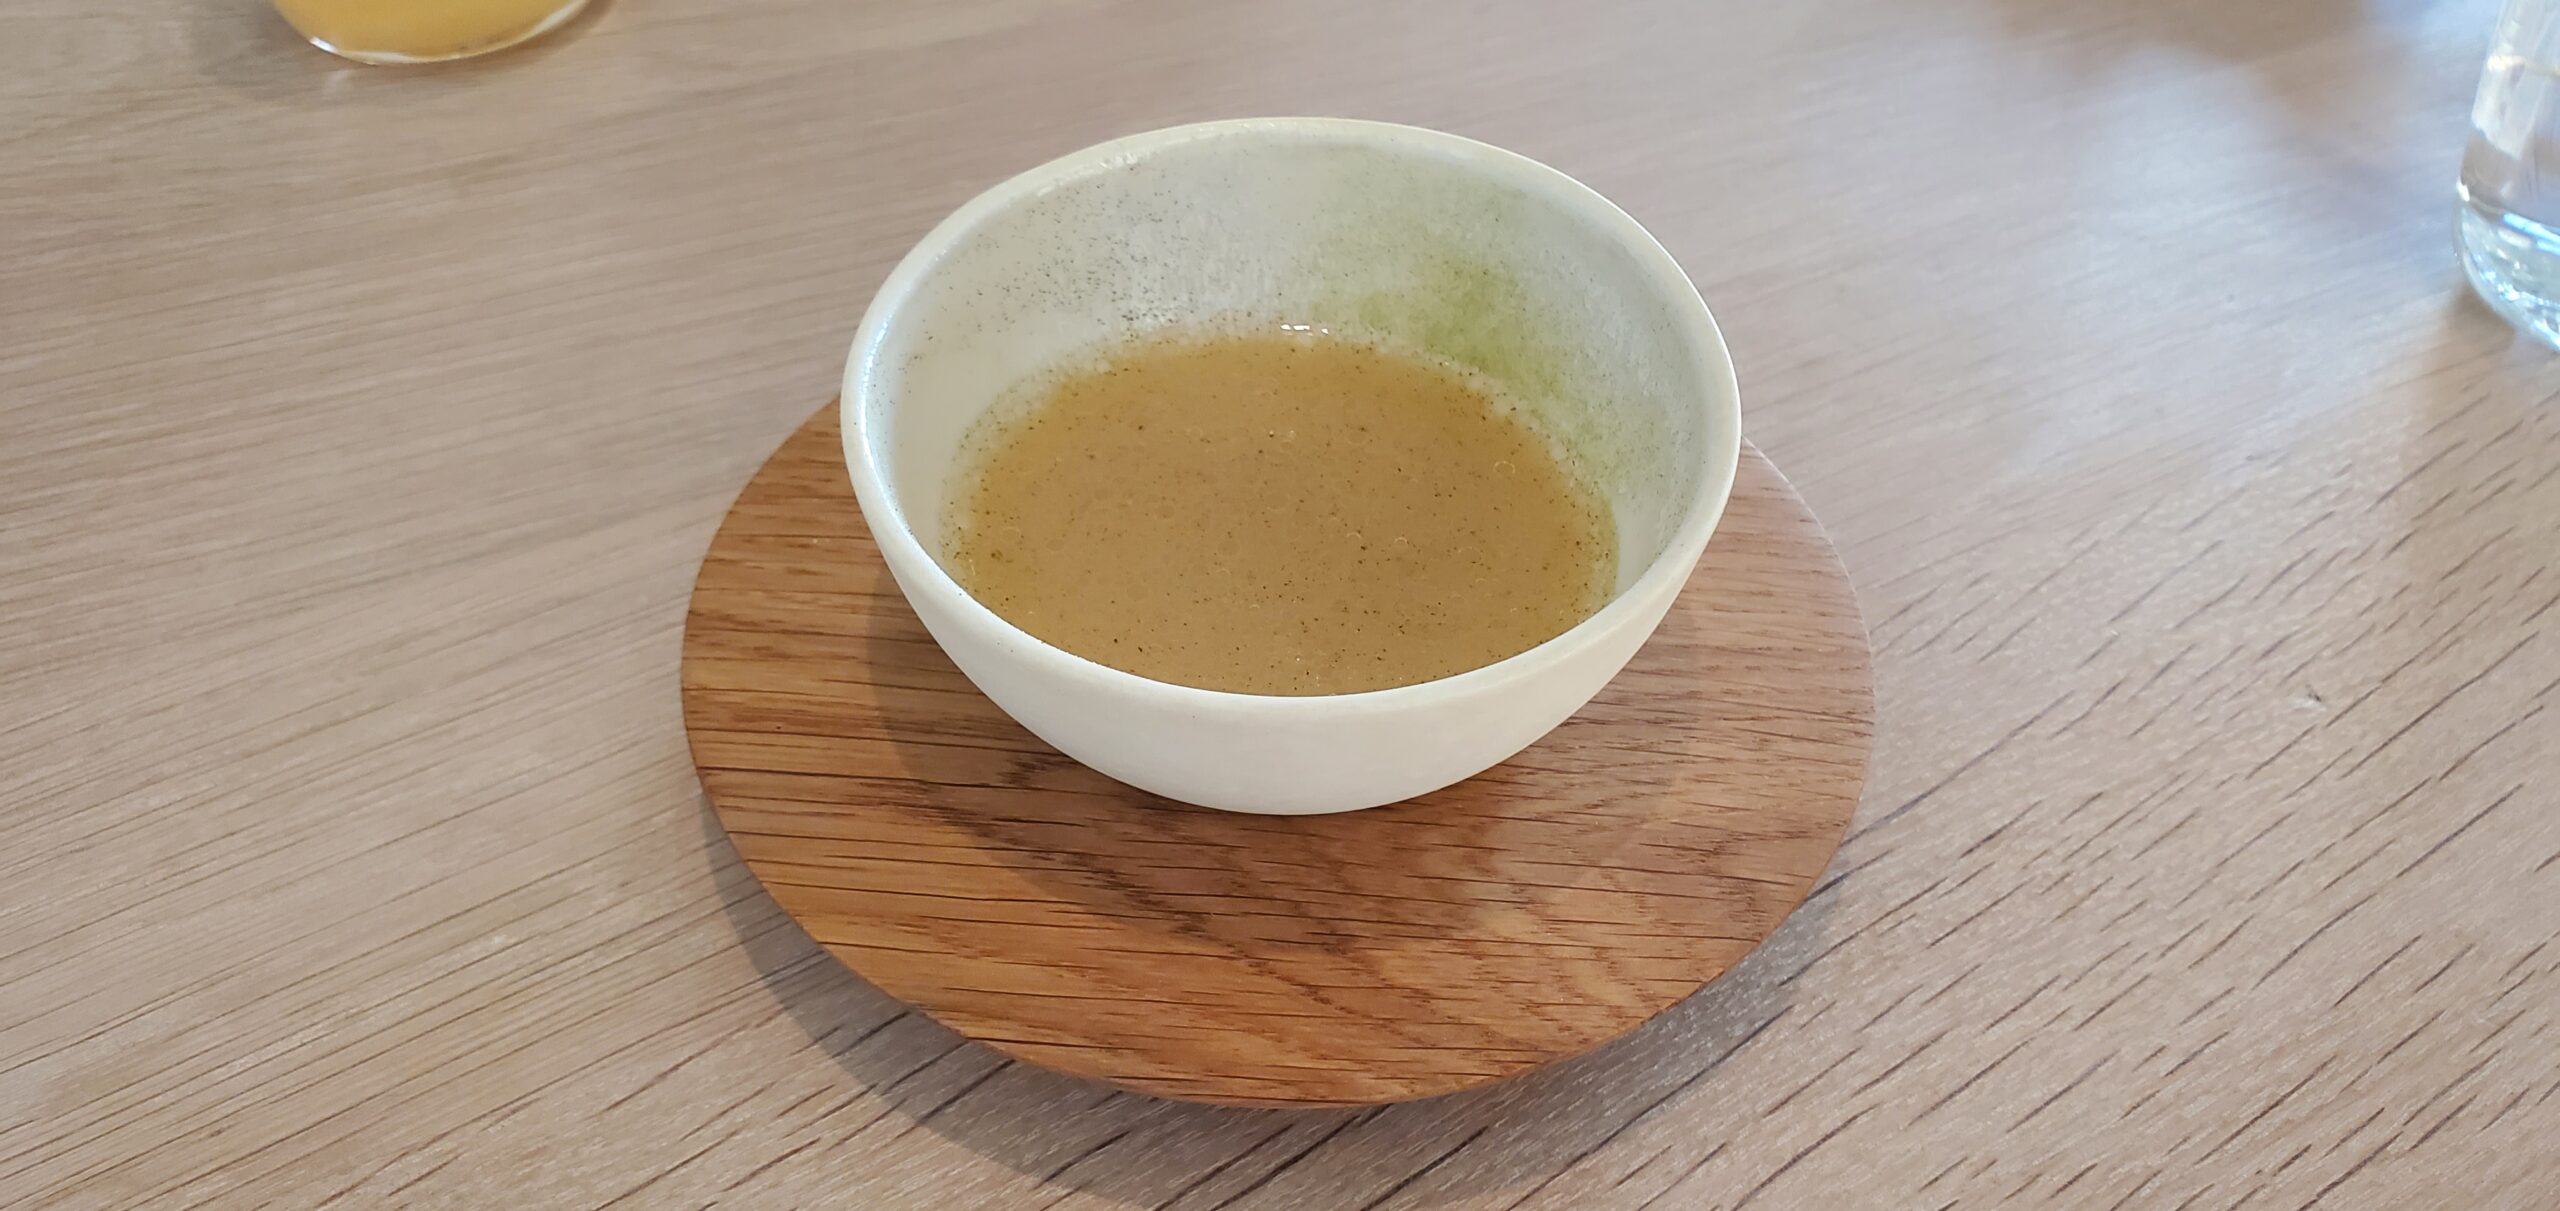 a bowl of brown liquid on a wood plate